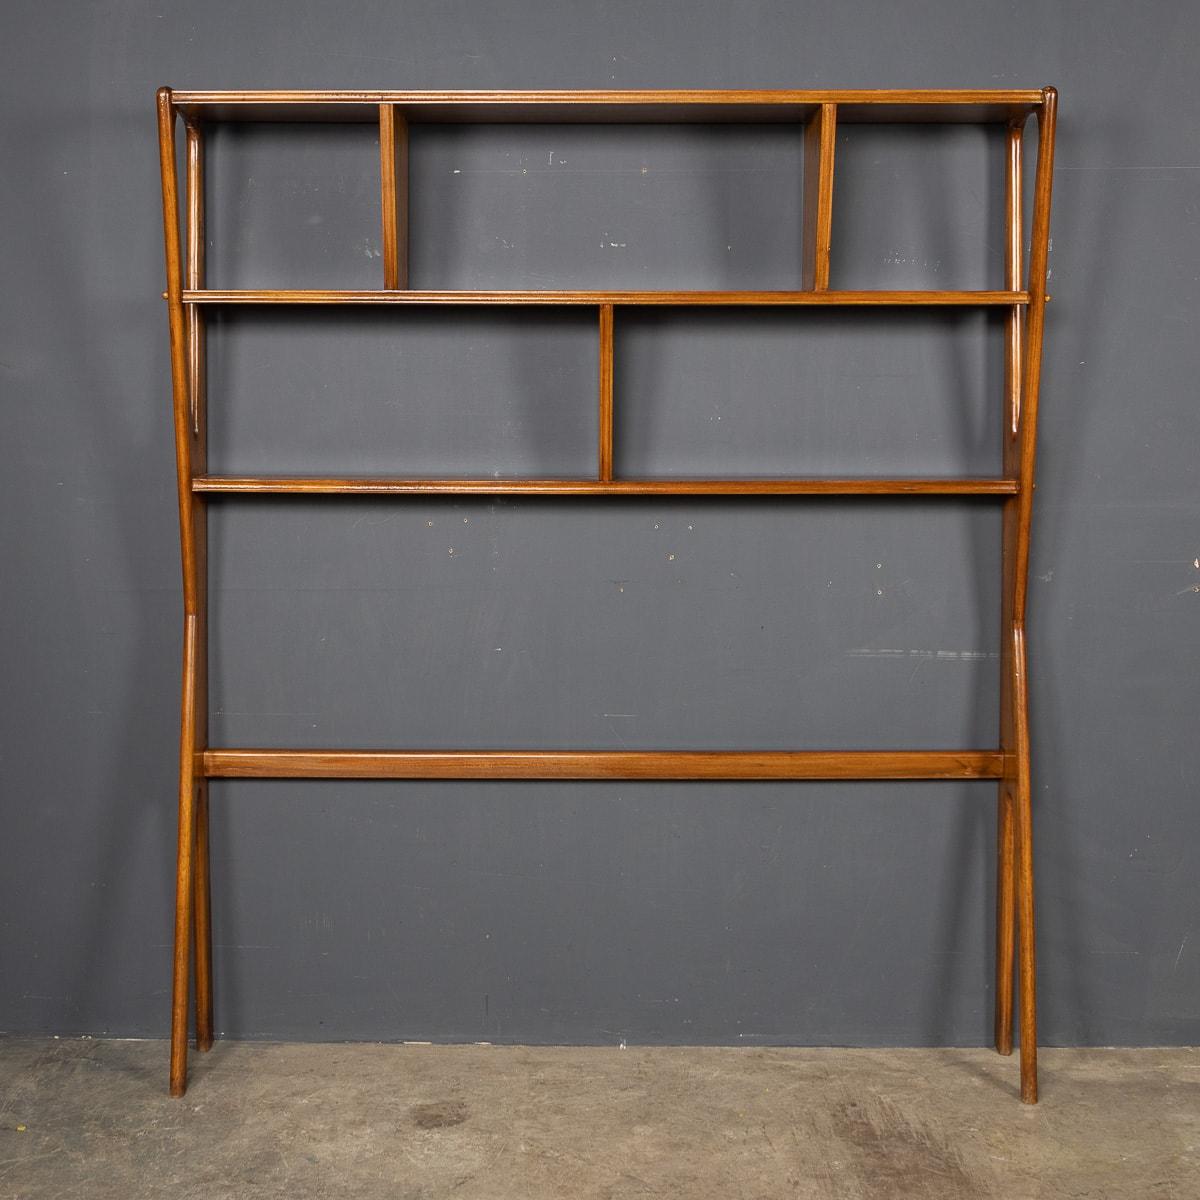 A mid-20thC Italian bookcase in a beautifully curved beechwood frame. This piece can also be used as a room divider. A very stylish and versatile piece of modernist design.

CONDITION
In Great Condition - No Damage.

SIZE
Height: 179cm
Width: